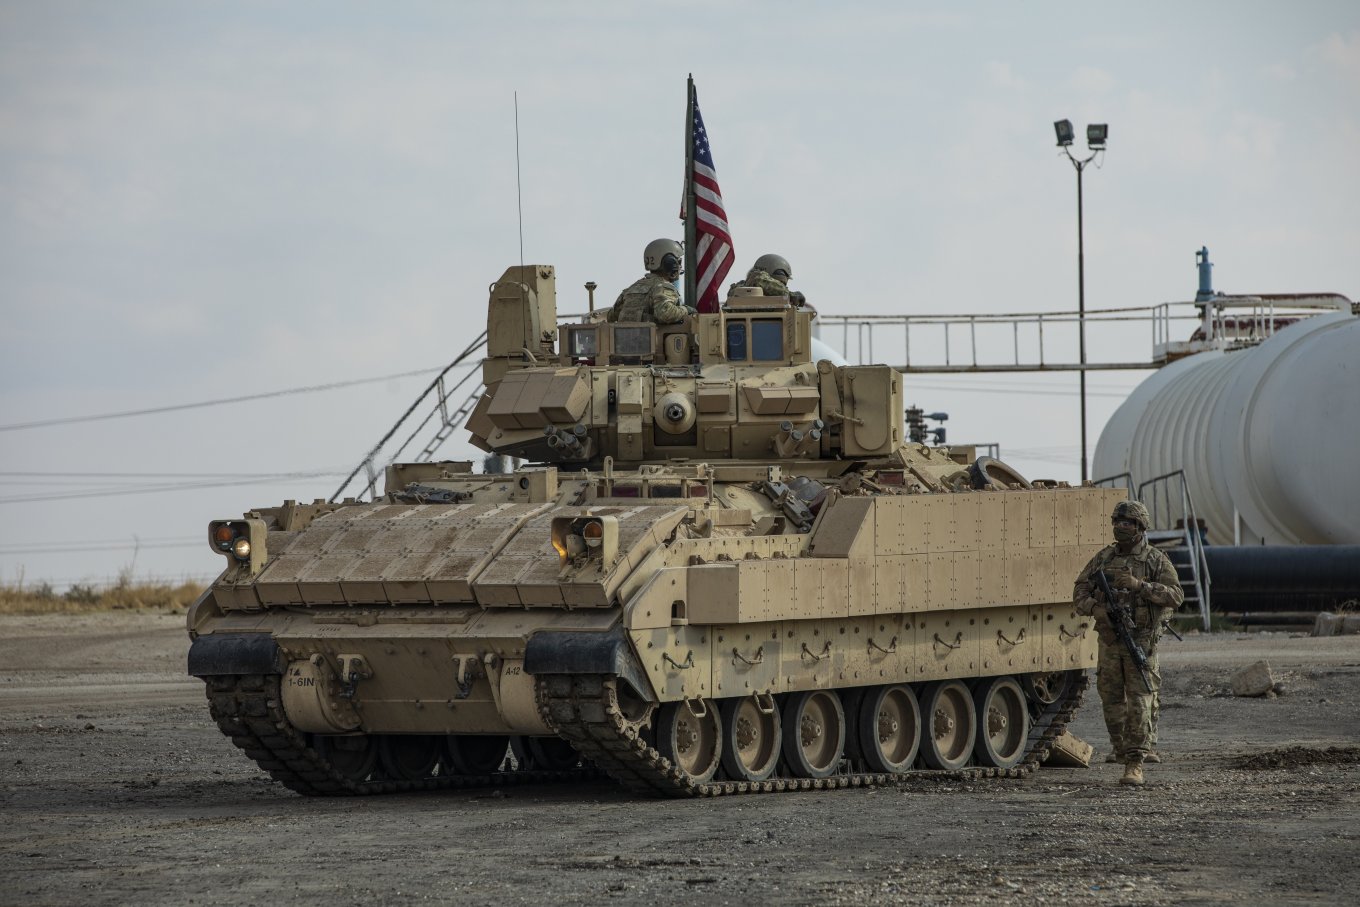 Illustrative photo: Bradley IFV of the 1st Armored Division